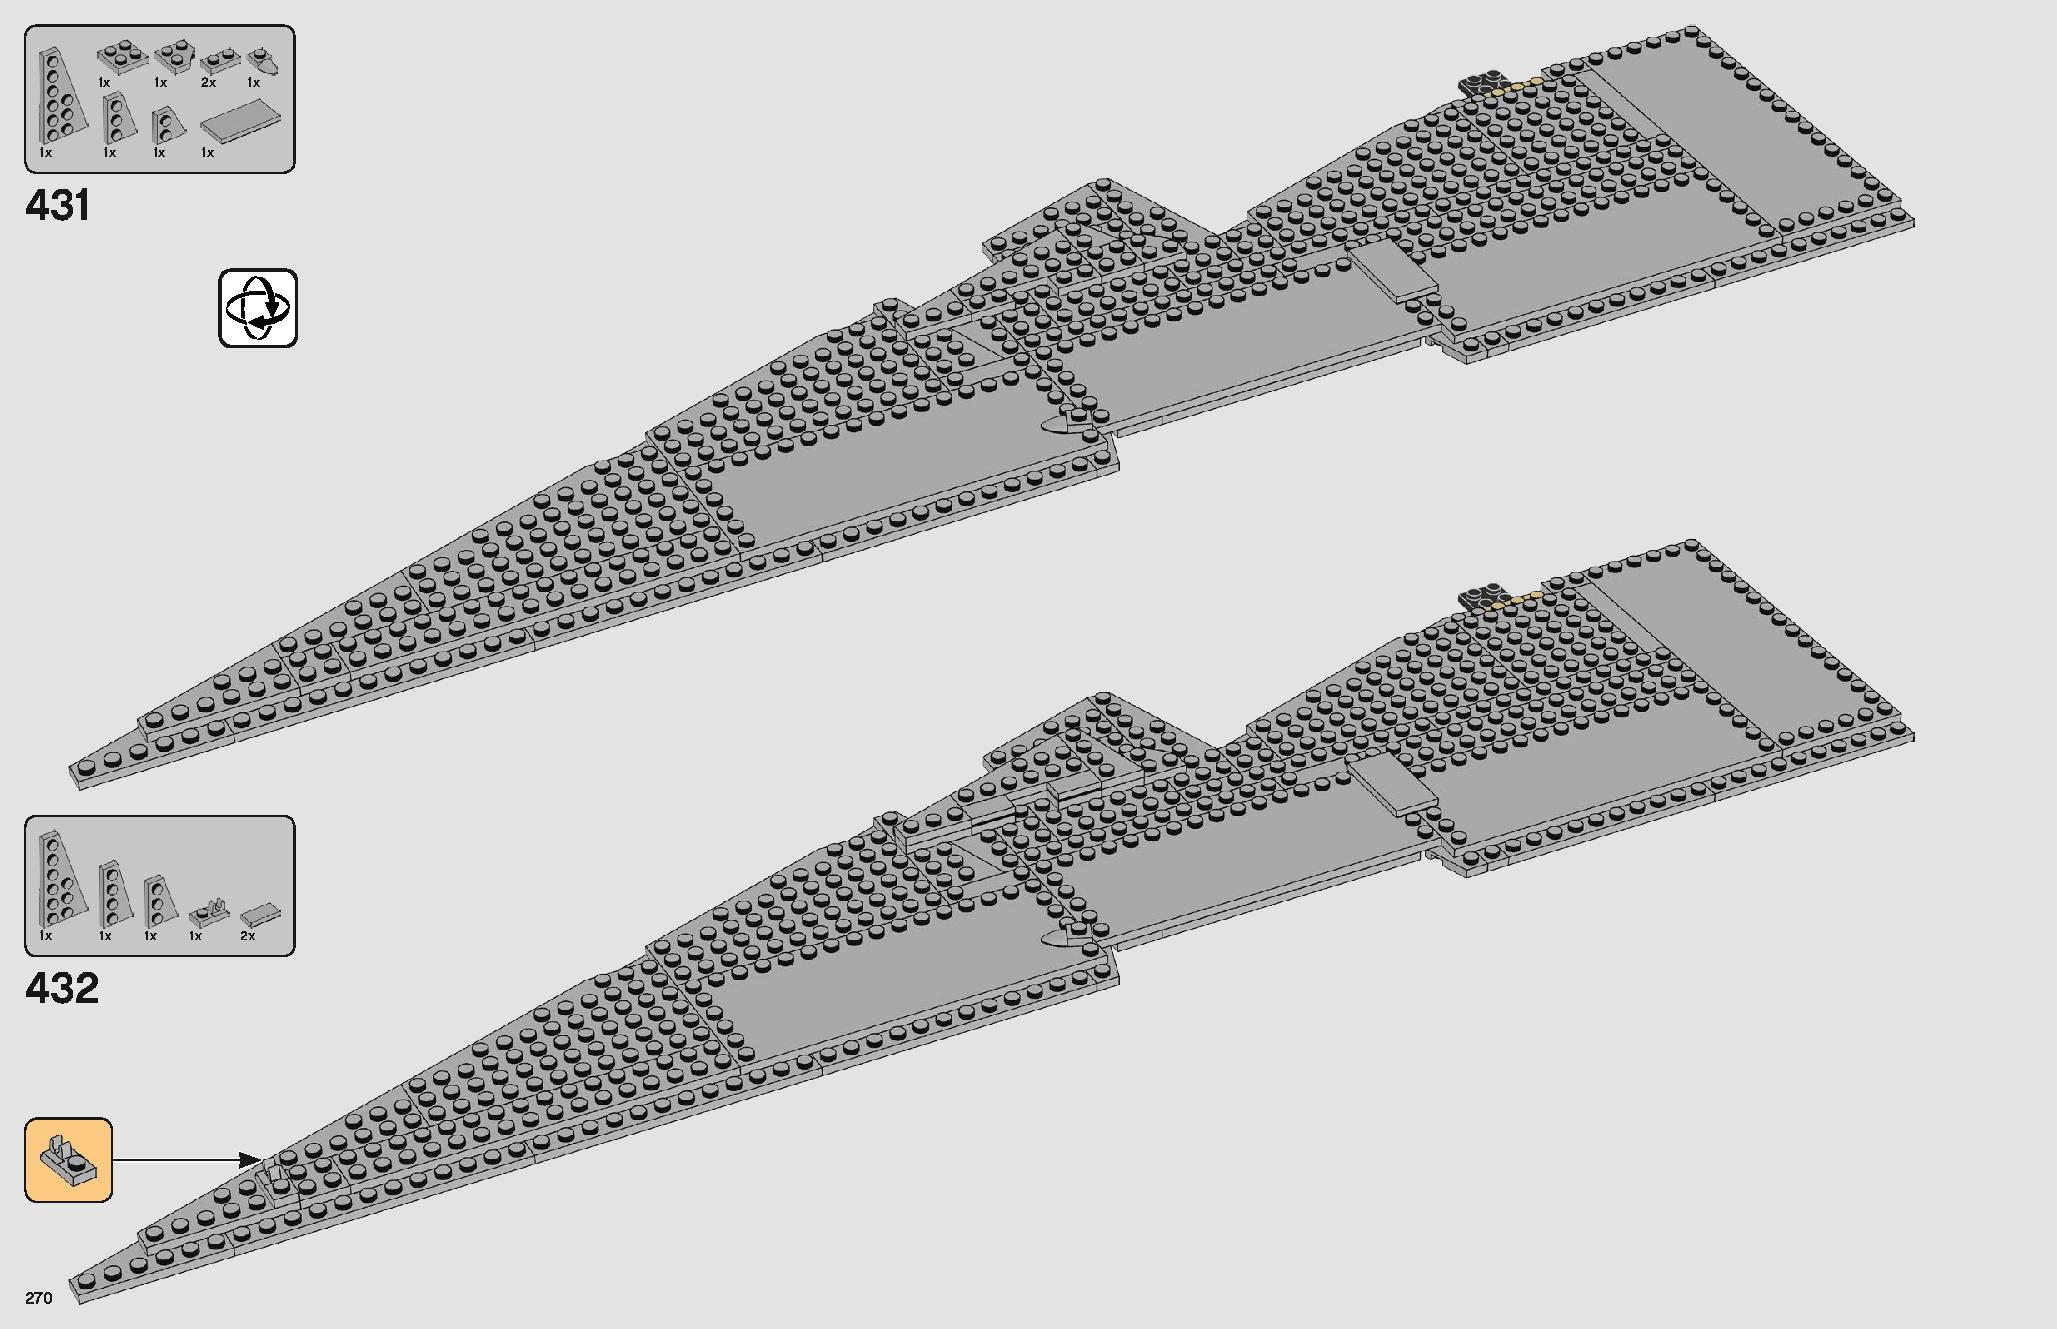 Imperial Star Destroyer 75252 LEGO information LEGO instructions 270 page